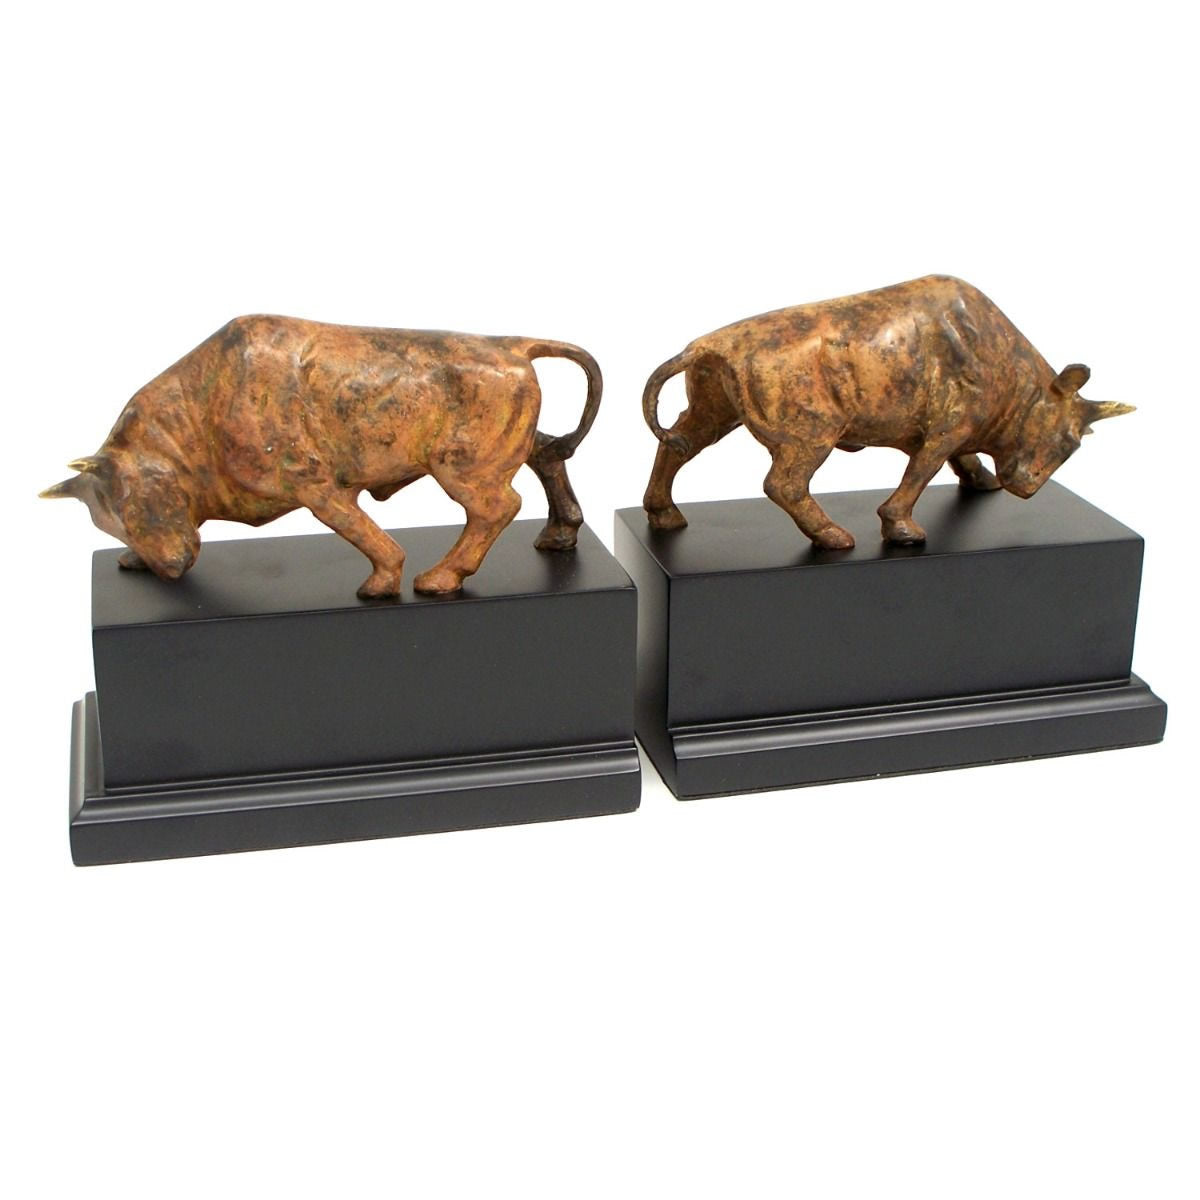 Double Bull Bookends on Black Wood Base